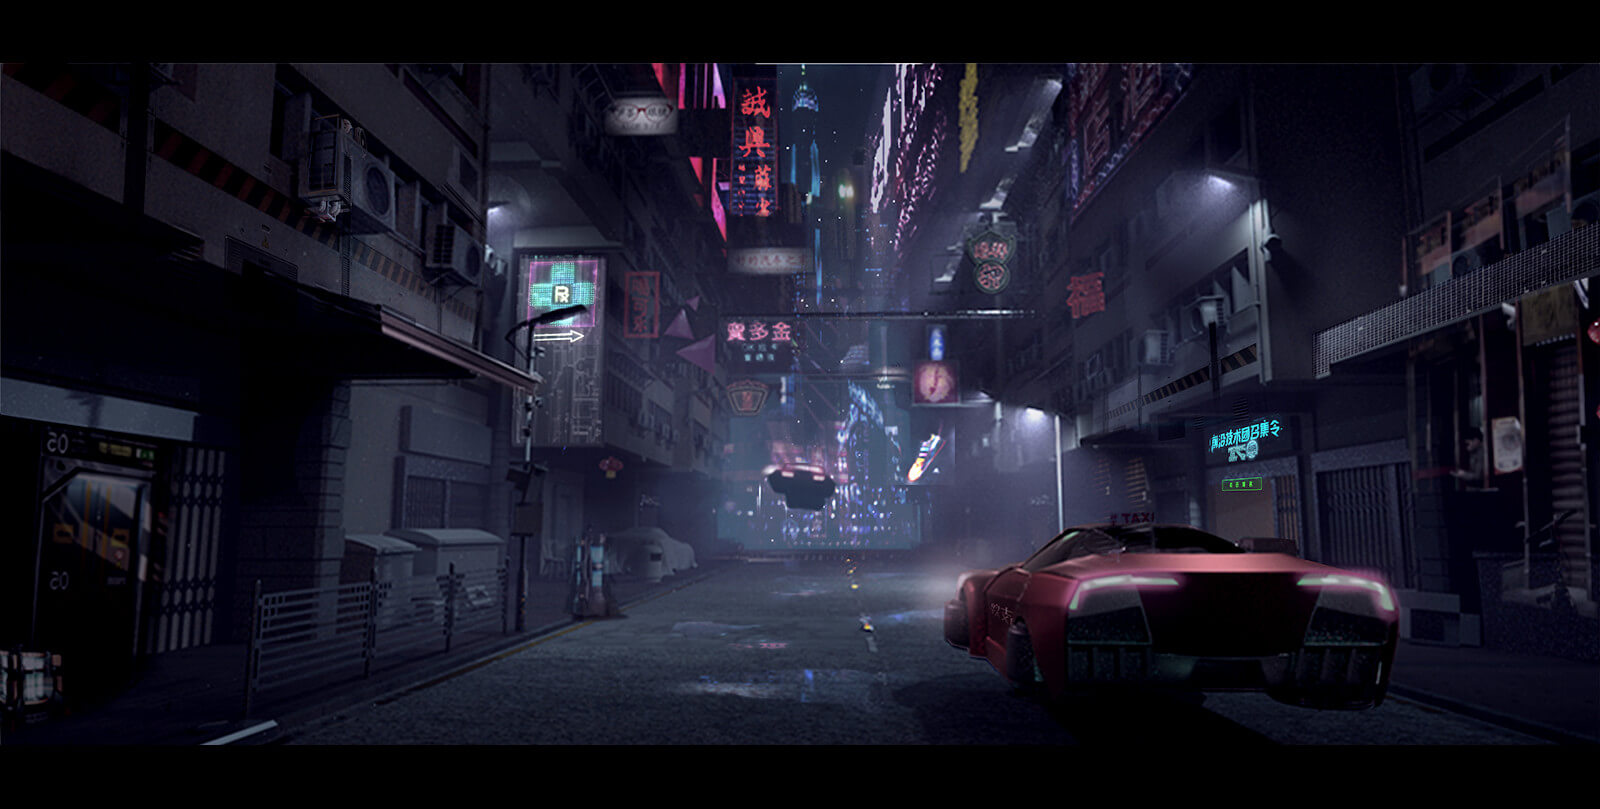 Concept art - hovering cars on futuristic city street